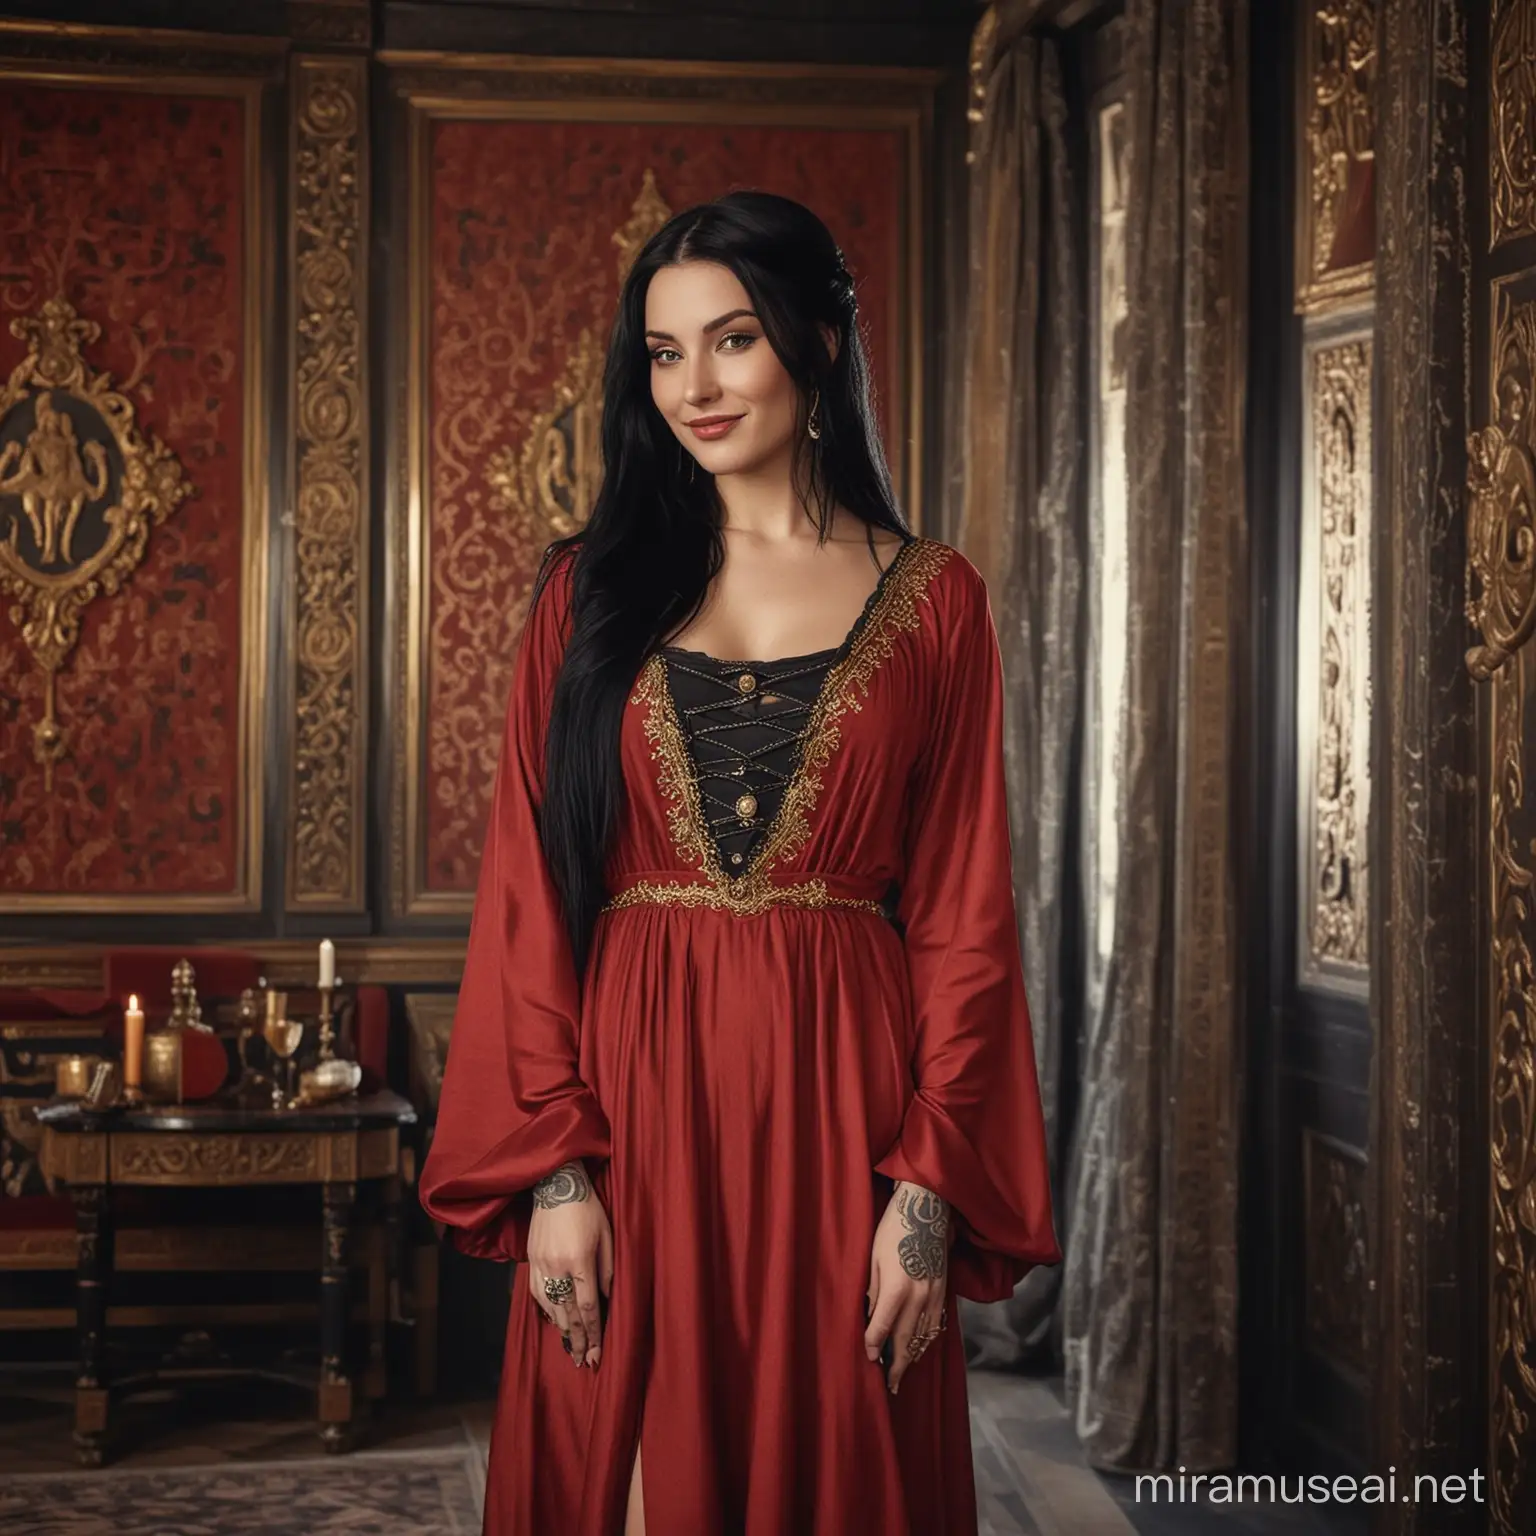 Photo medieval style: a woman 28 years old with long, straight black hair, tattooed and black make-up in a noble, medieval, dark red robe with gold buttons stands in a noble room in Roman style and smiles. Sigma 85mm F/1.4

